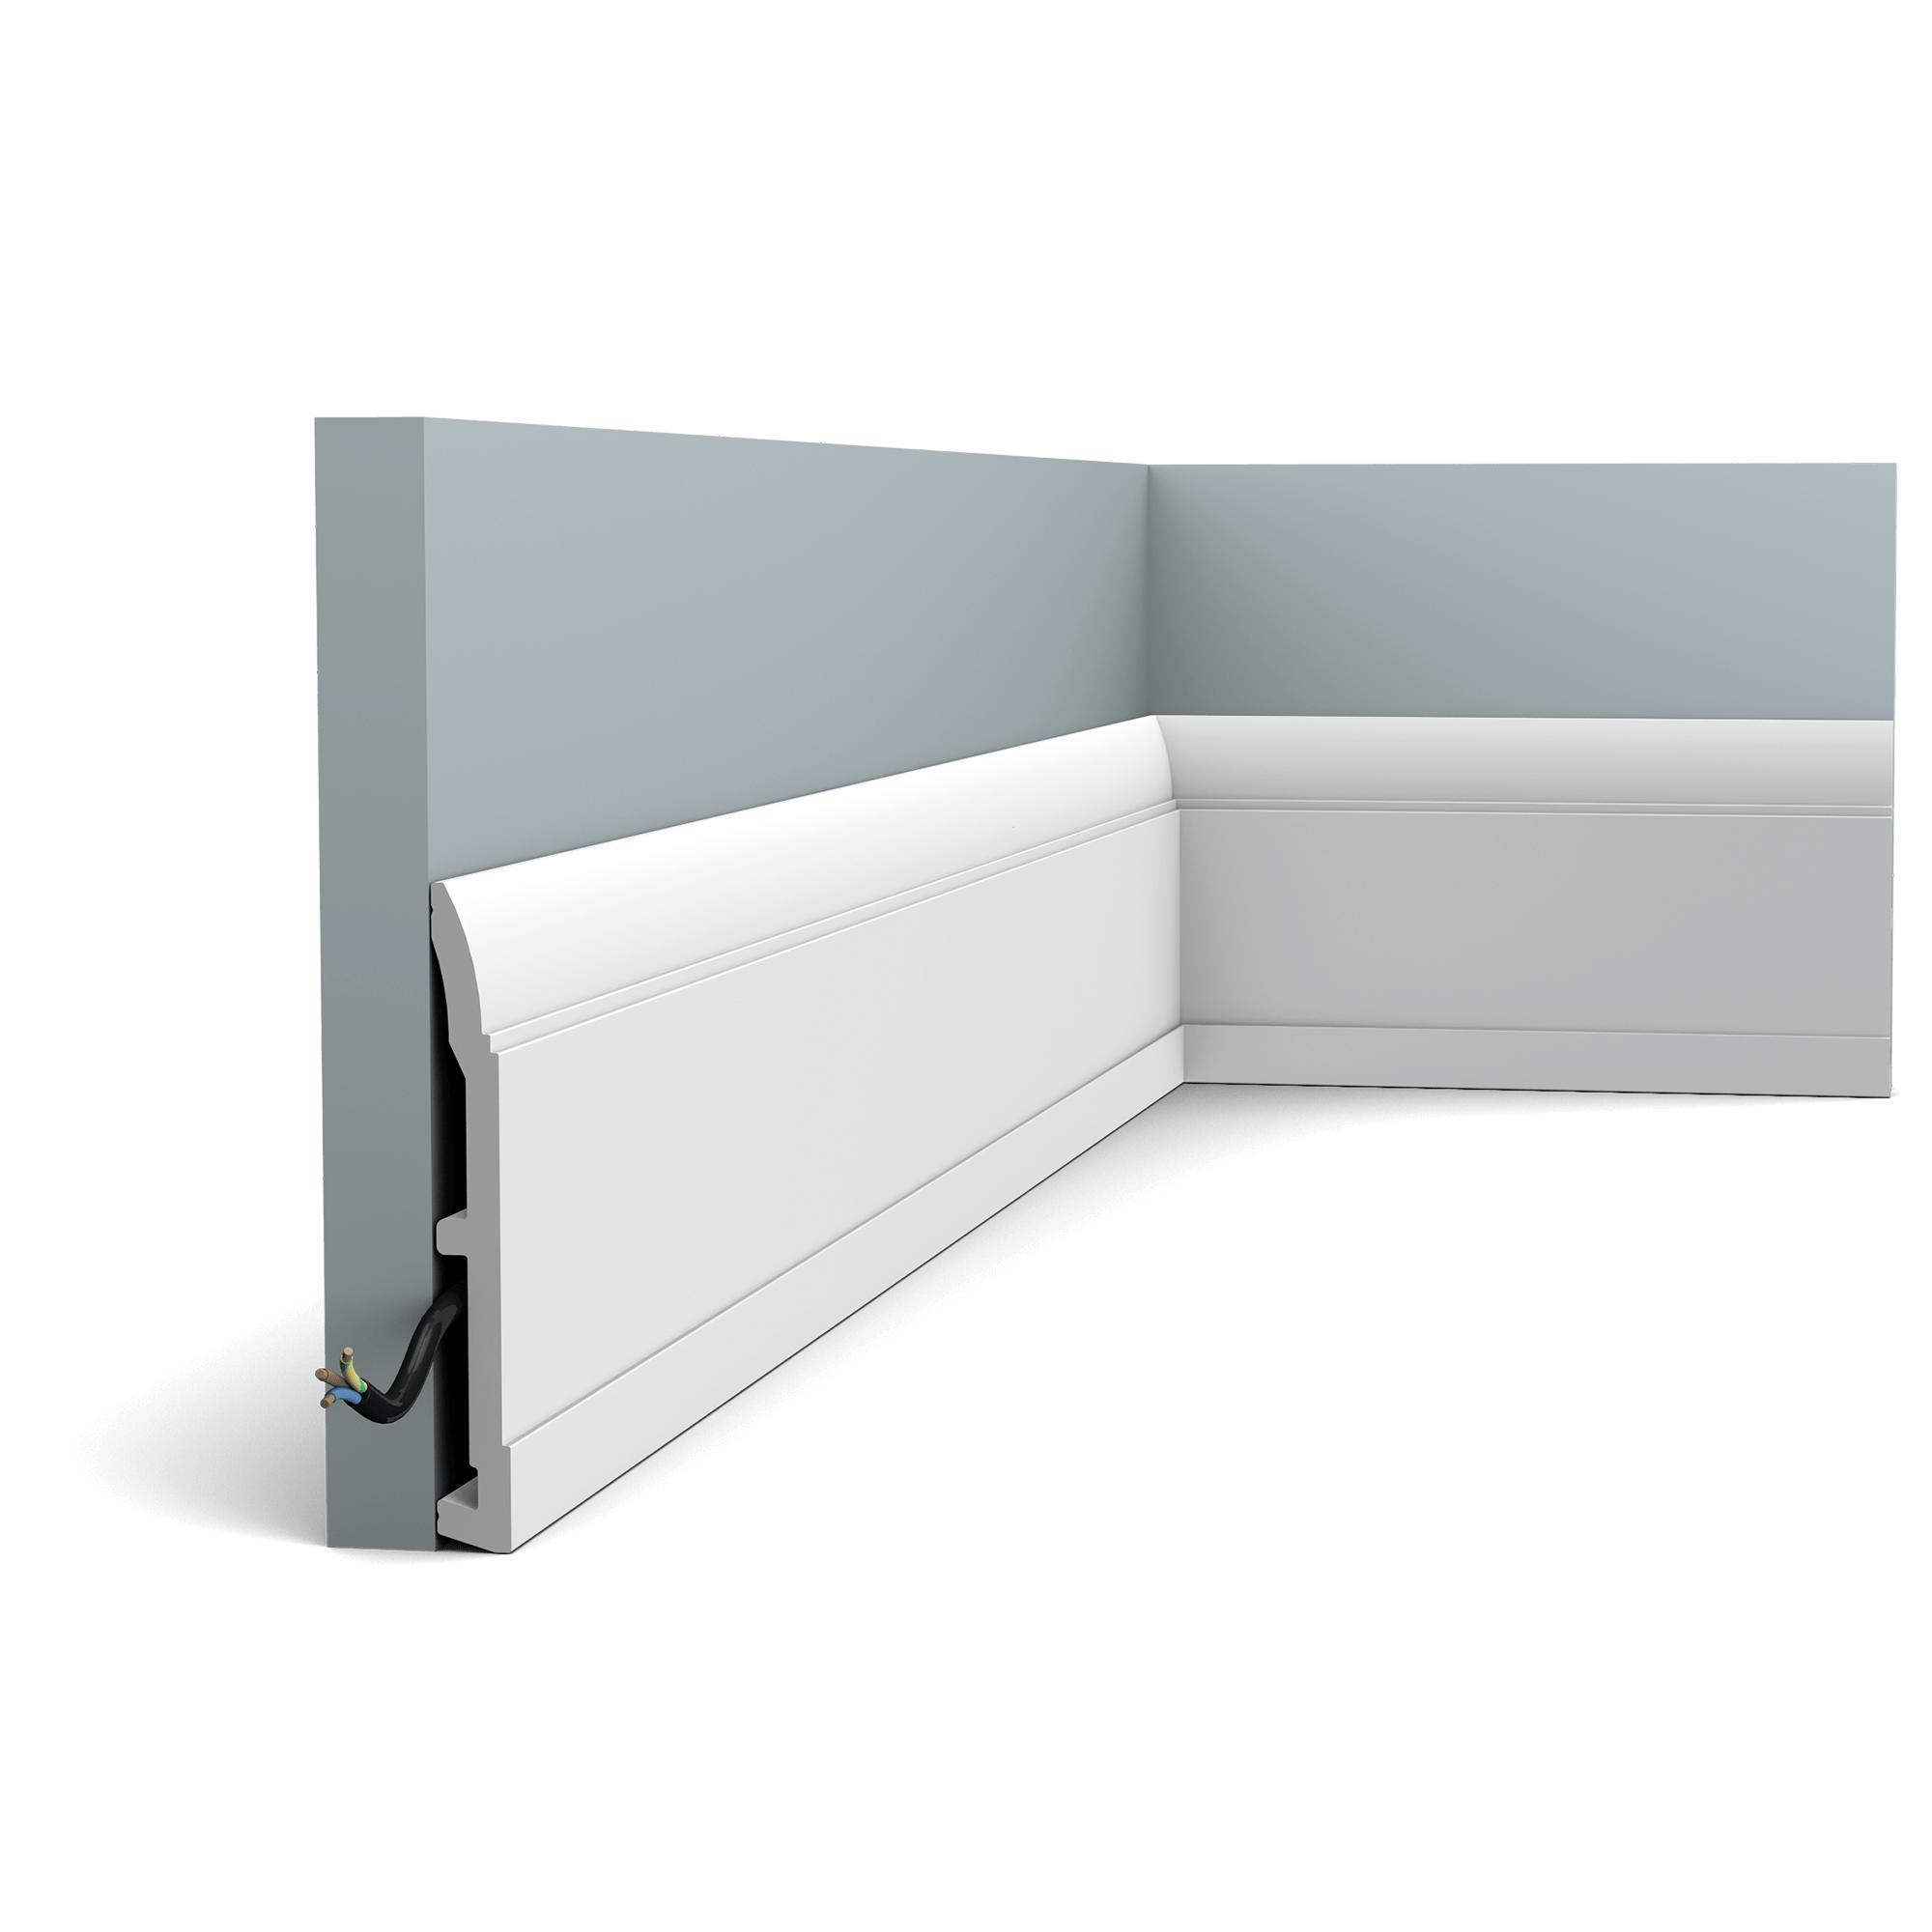 Modern skirting board with linear pattern. The restrained design of this skirting board makes it suitable for a variety of decorating styles.